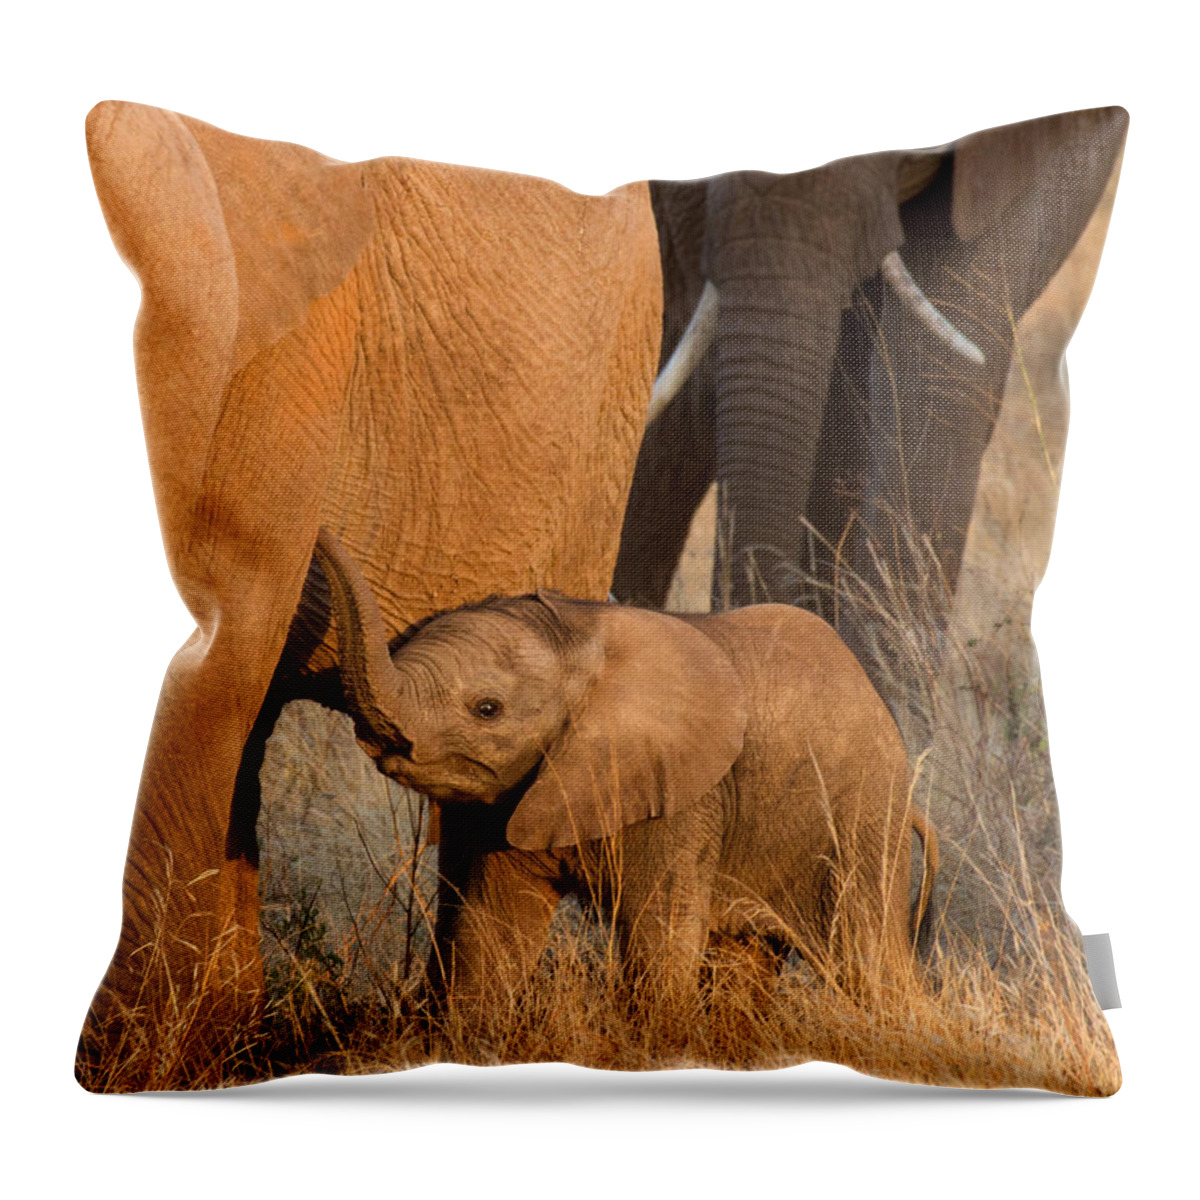 African Elephant Throw Pillow featuring the photograph Baby Elephant 2 by Chris Scroggins